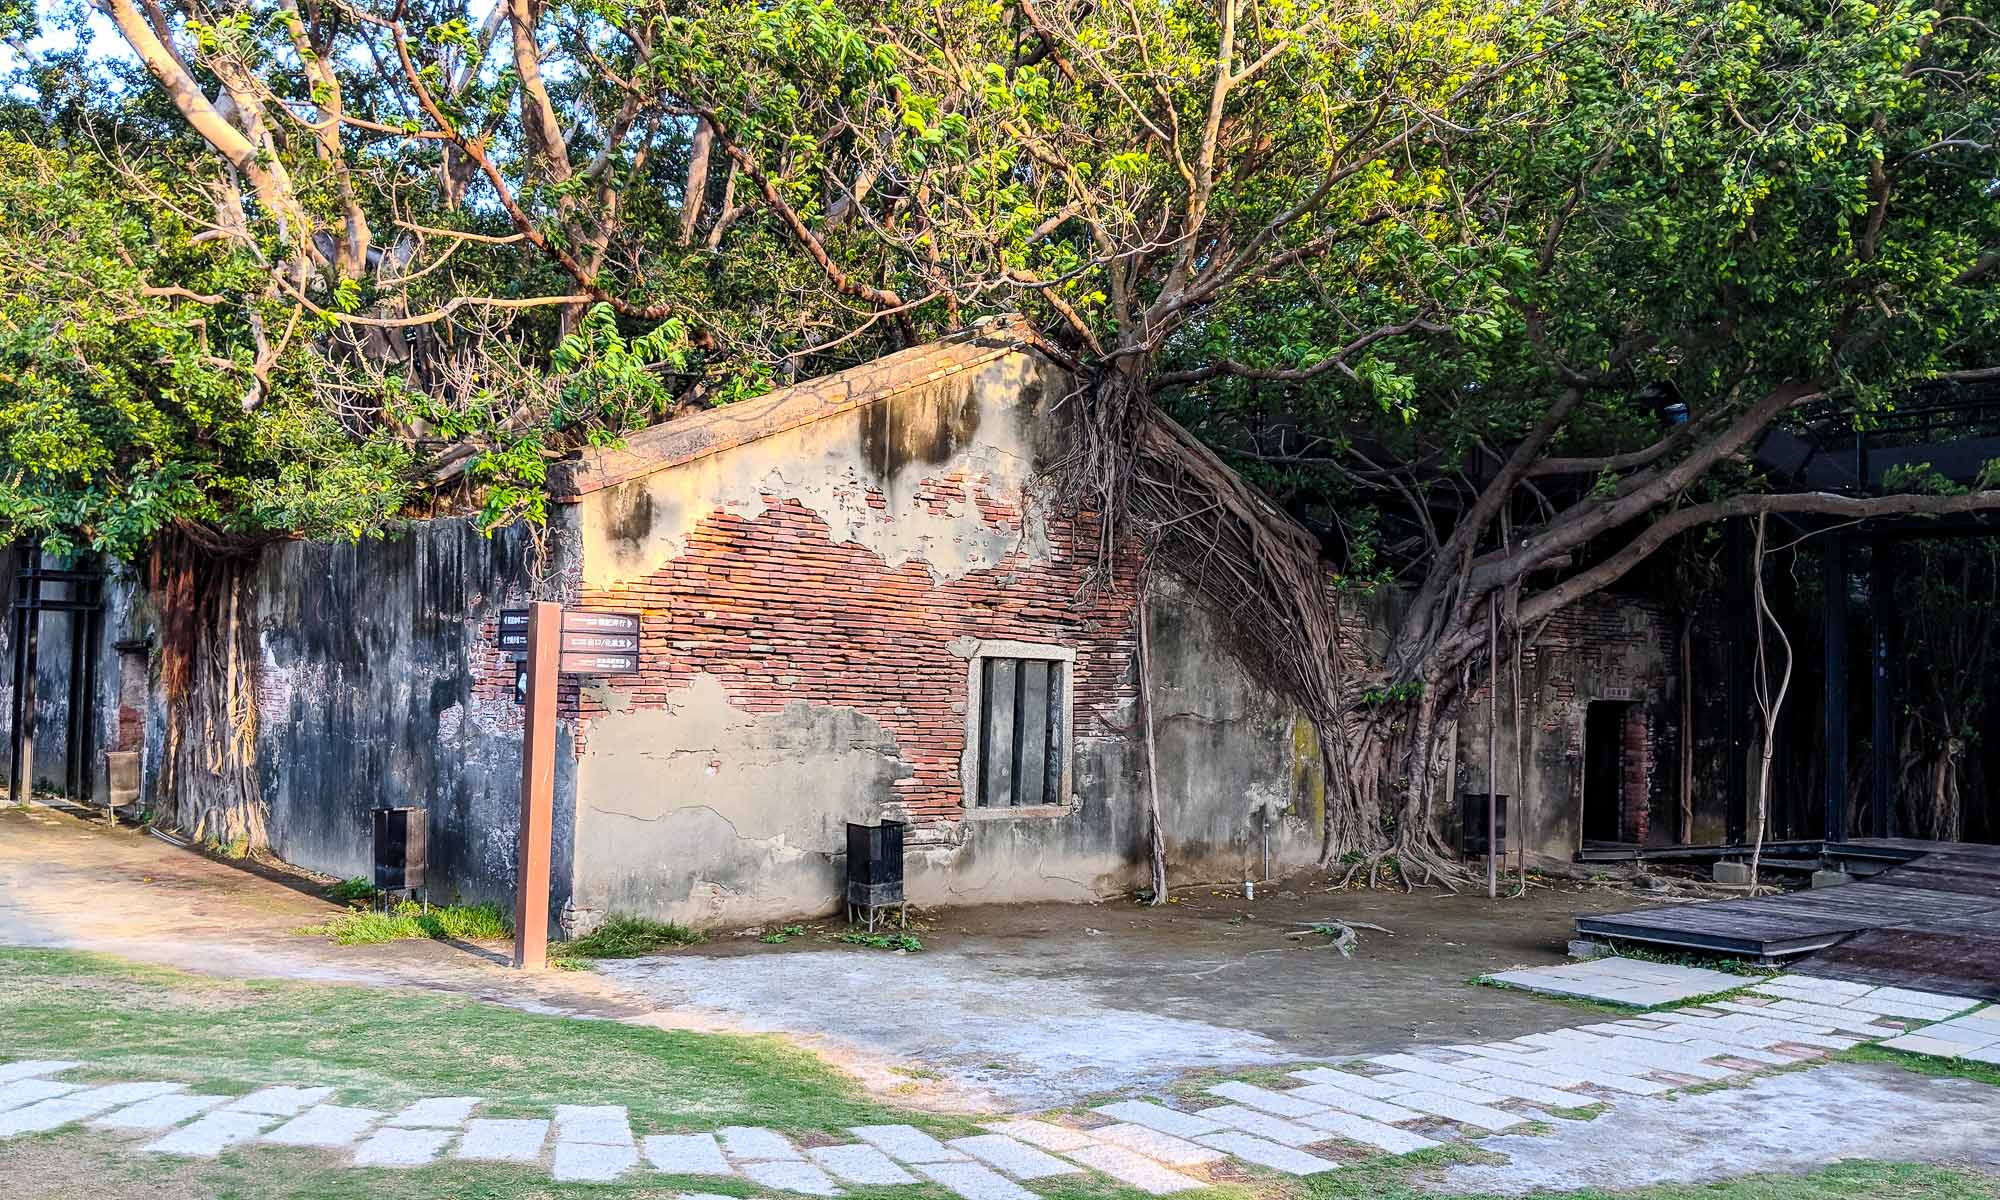 The historic Anping Tree House located in Tainan's Historic Anping District.